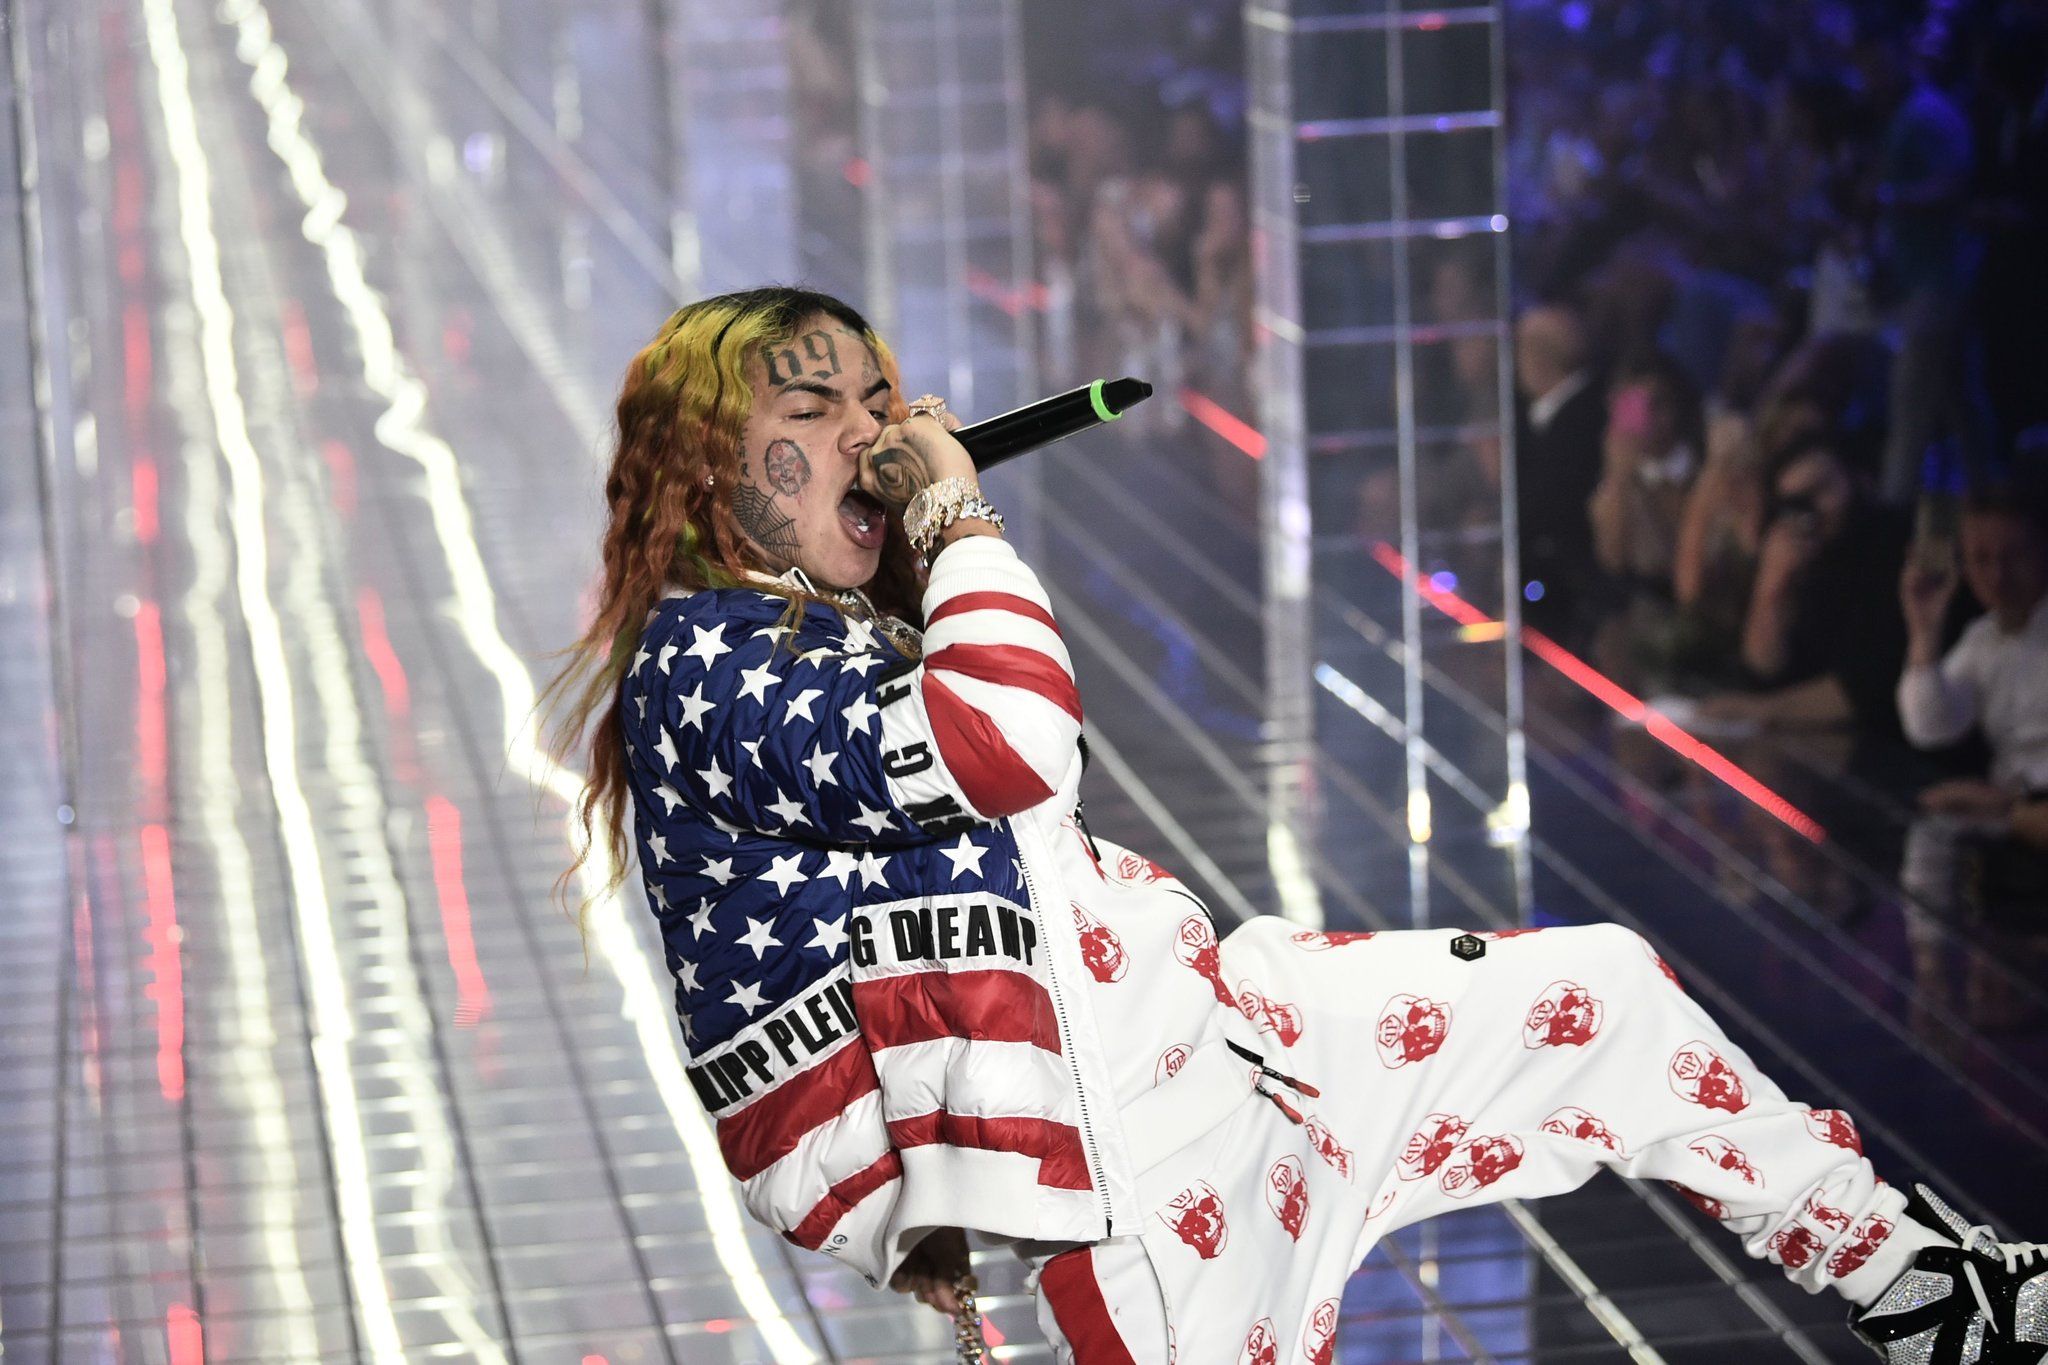 6ix9ine Returns With New Song and Defiant Livestream: 'I Ratted